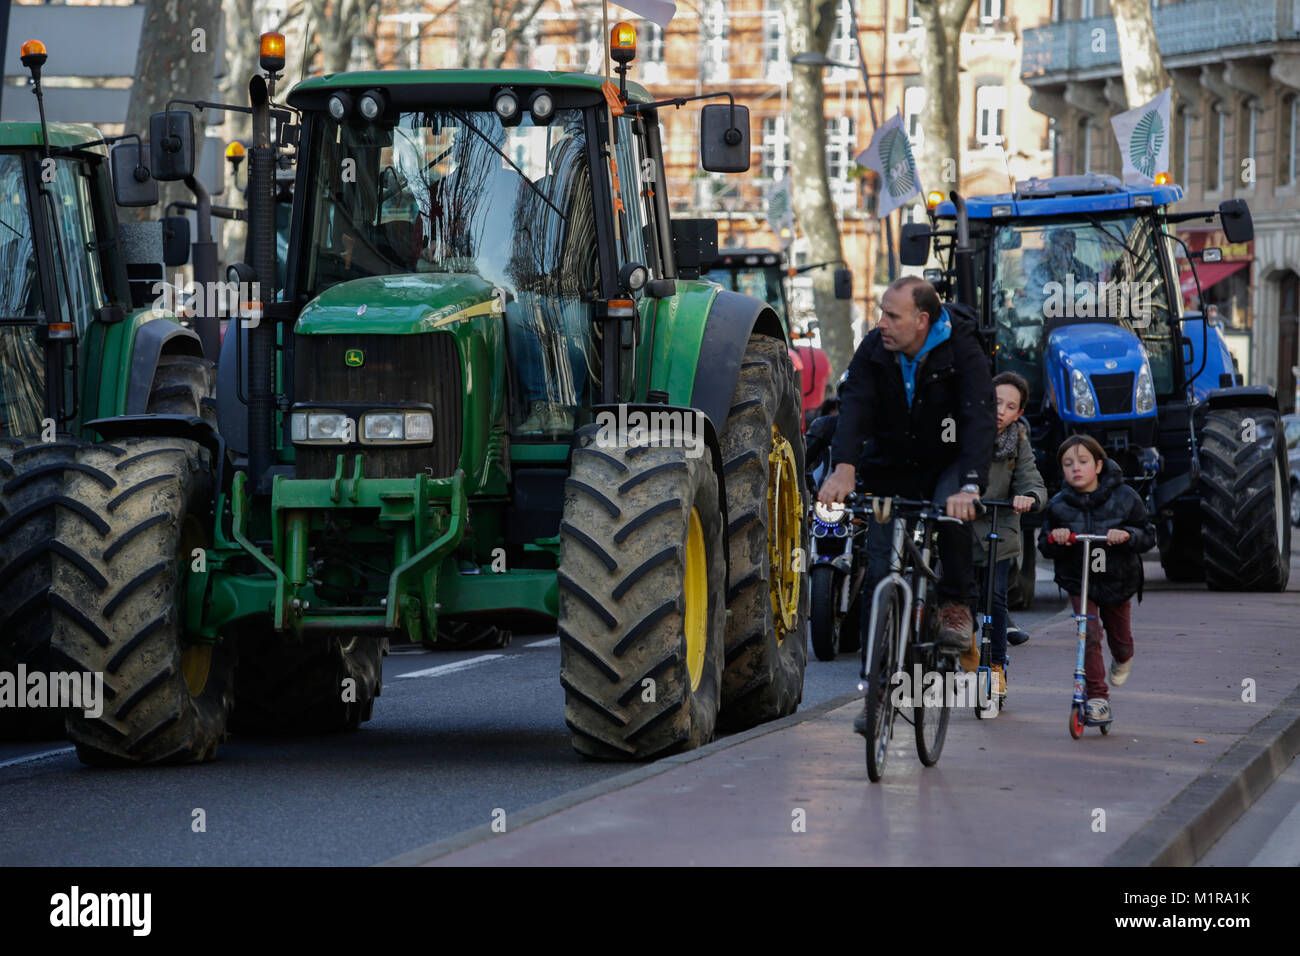 Toulouse, France. 31st Jan, 2018. Cyclists pass by the tractors in demonstration in Toulouse, France, Jan. 31, 2018. Farmers set up a filter dam on Wednesday to slow down traffic to protest against the decrease of the subsidies allocated in the region. Credit: Jose Santos/Xinhua/Alamy Live News Stock Photo